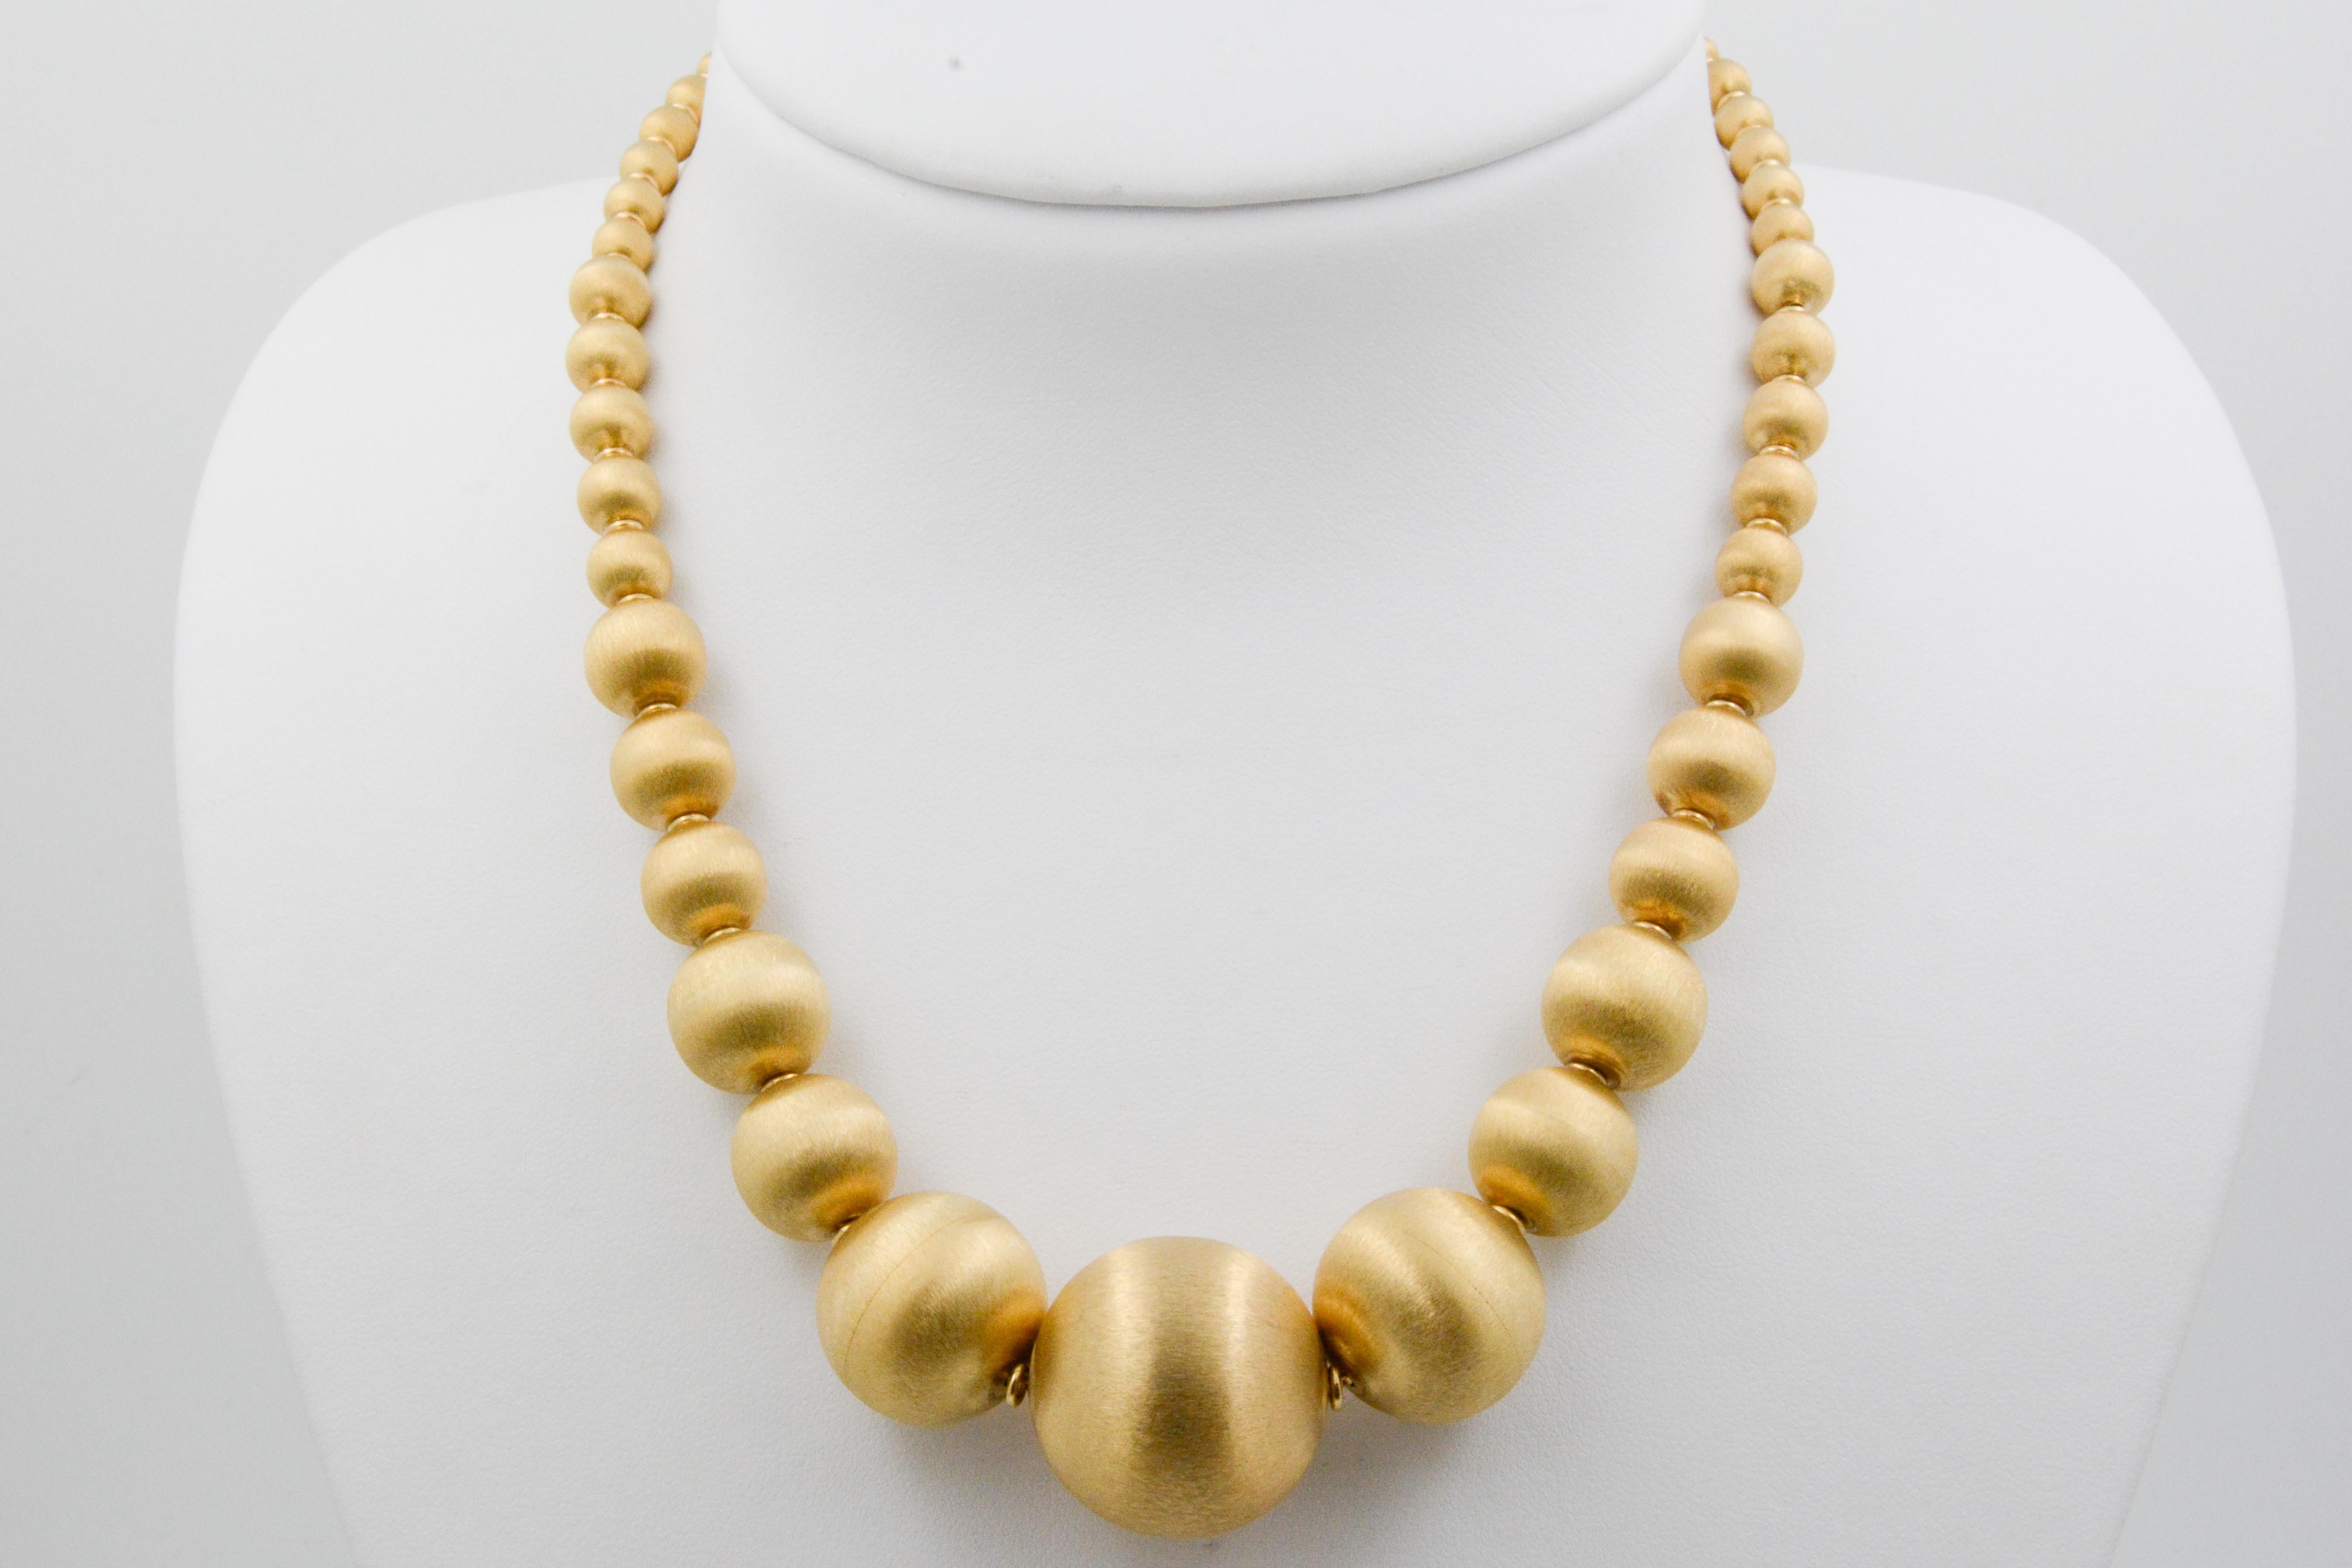 This 14K yellow gold graduated necklace is classic and elegant with shiny and smooth textured beads. The beads range from 24.02mm x 5.91mm in size across the neck. This simplistic style necklace encompasses the true meaning of Italy's craftsmanship,